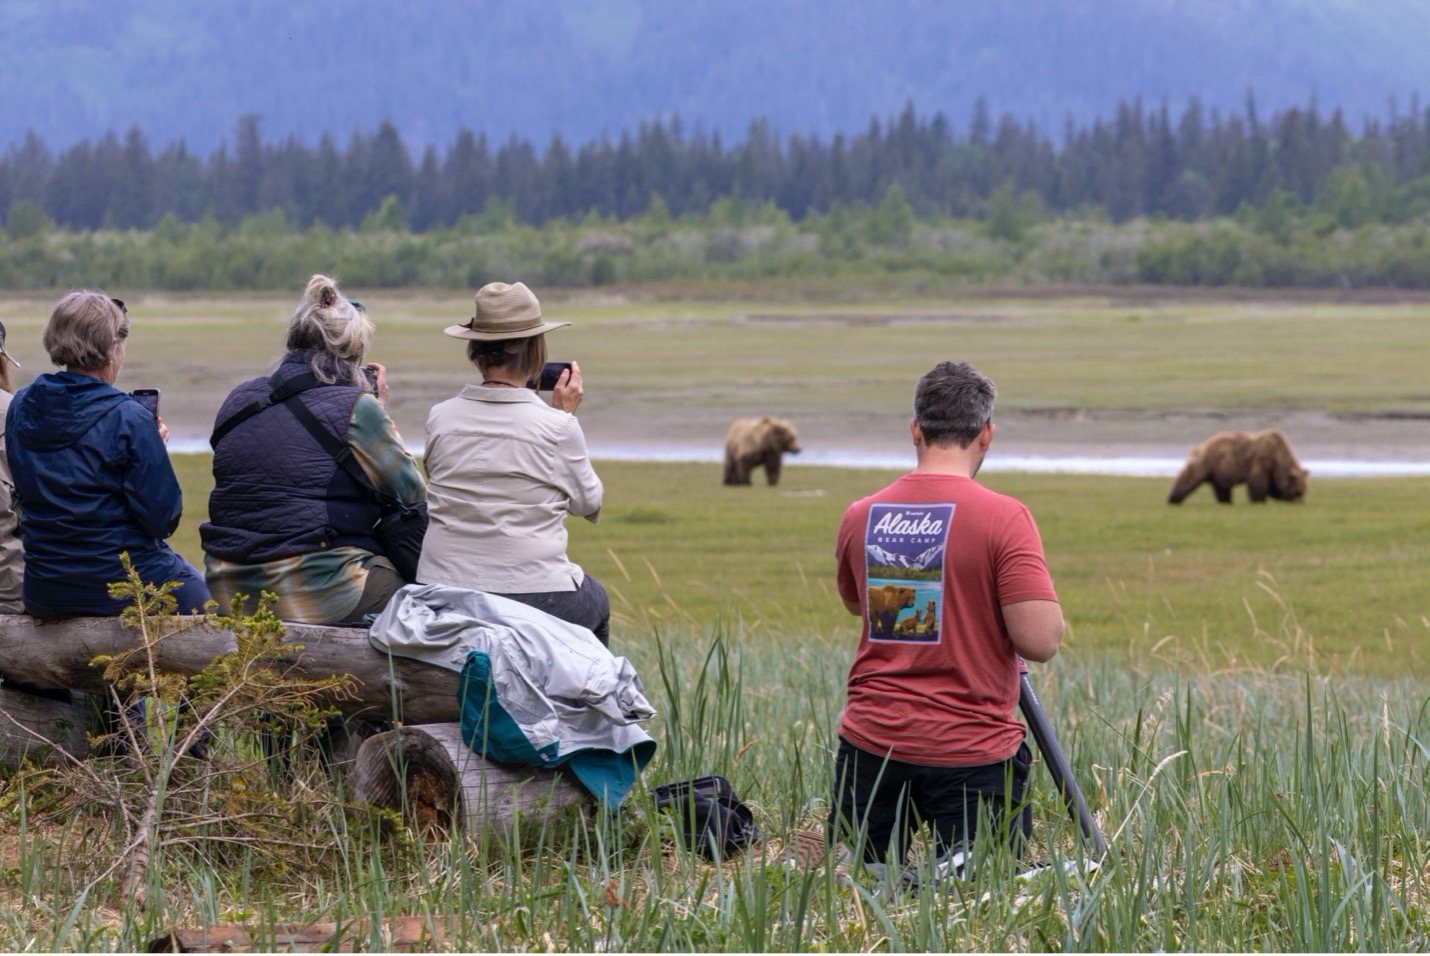 photographers enjoy watching and photographing large grizzlies near bear camp